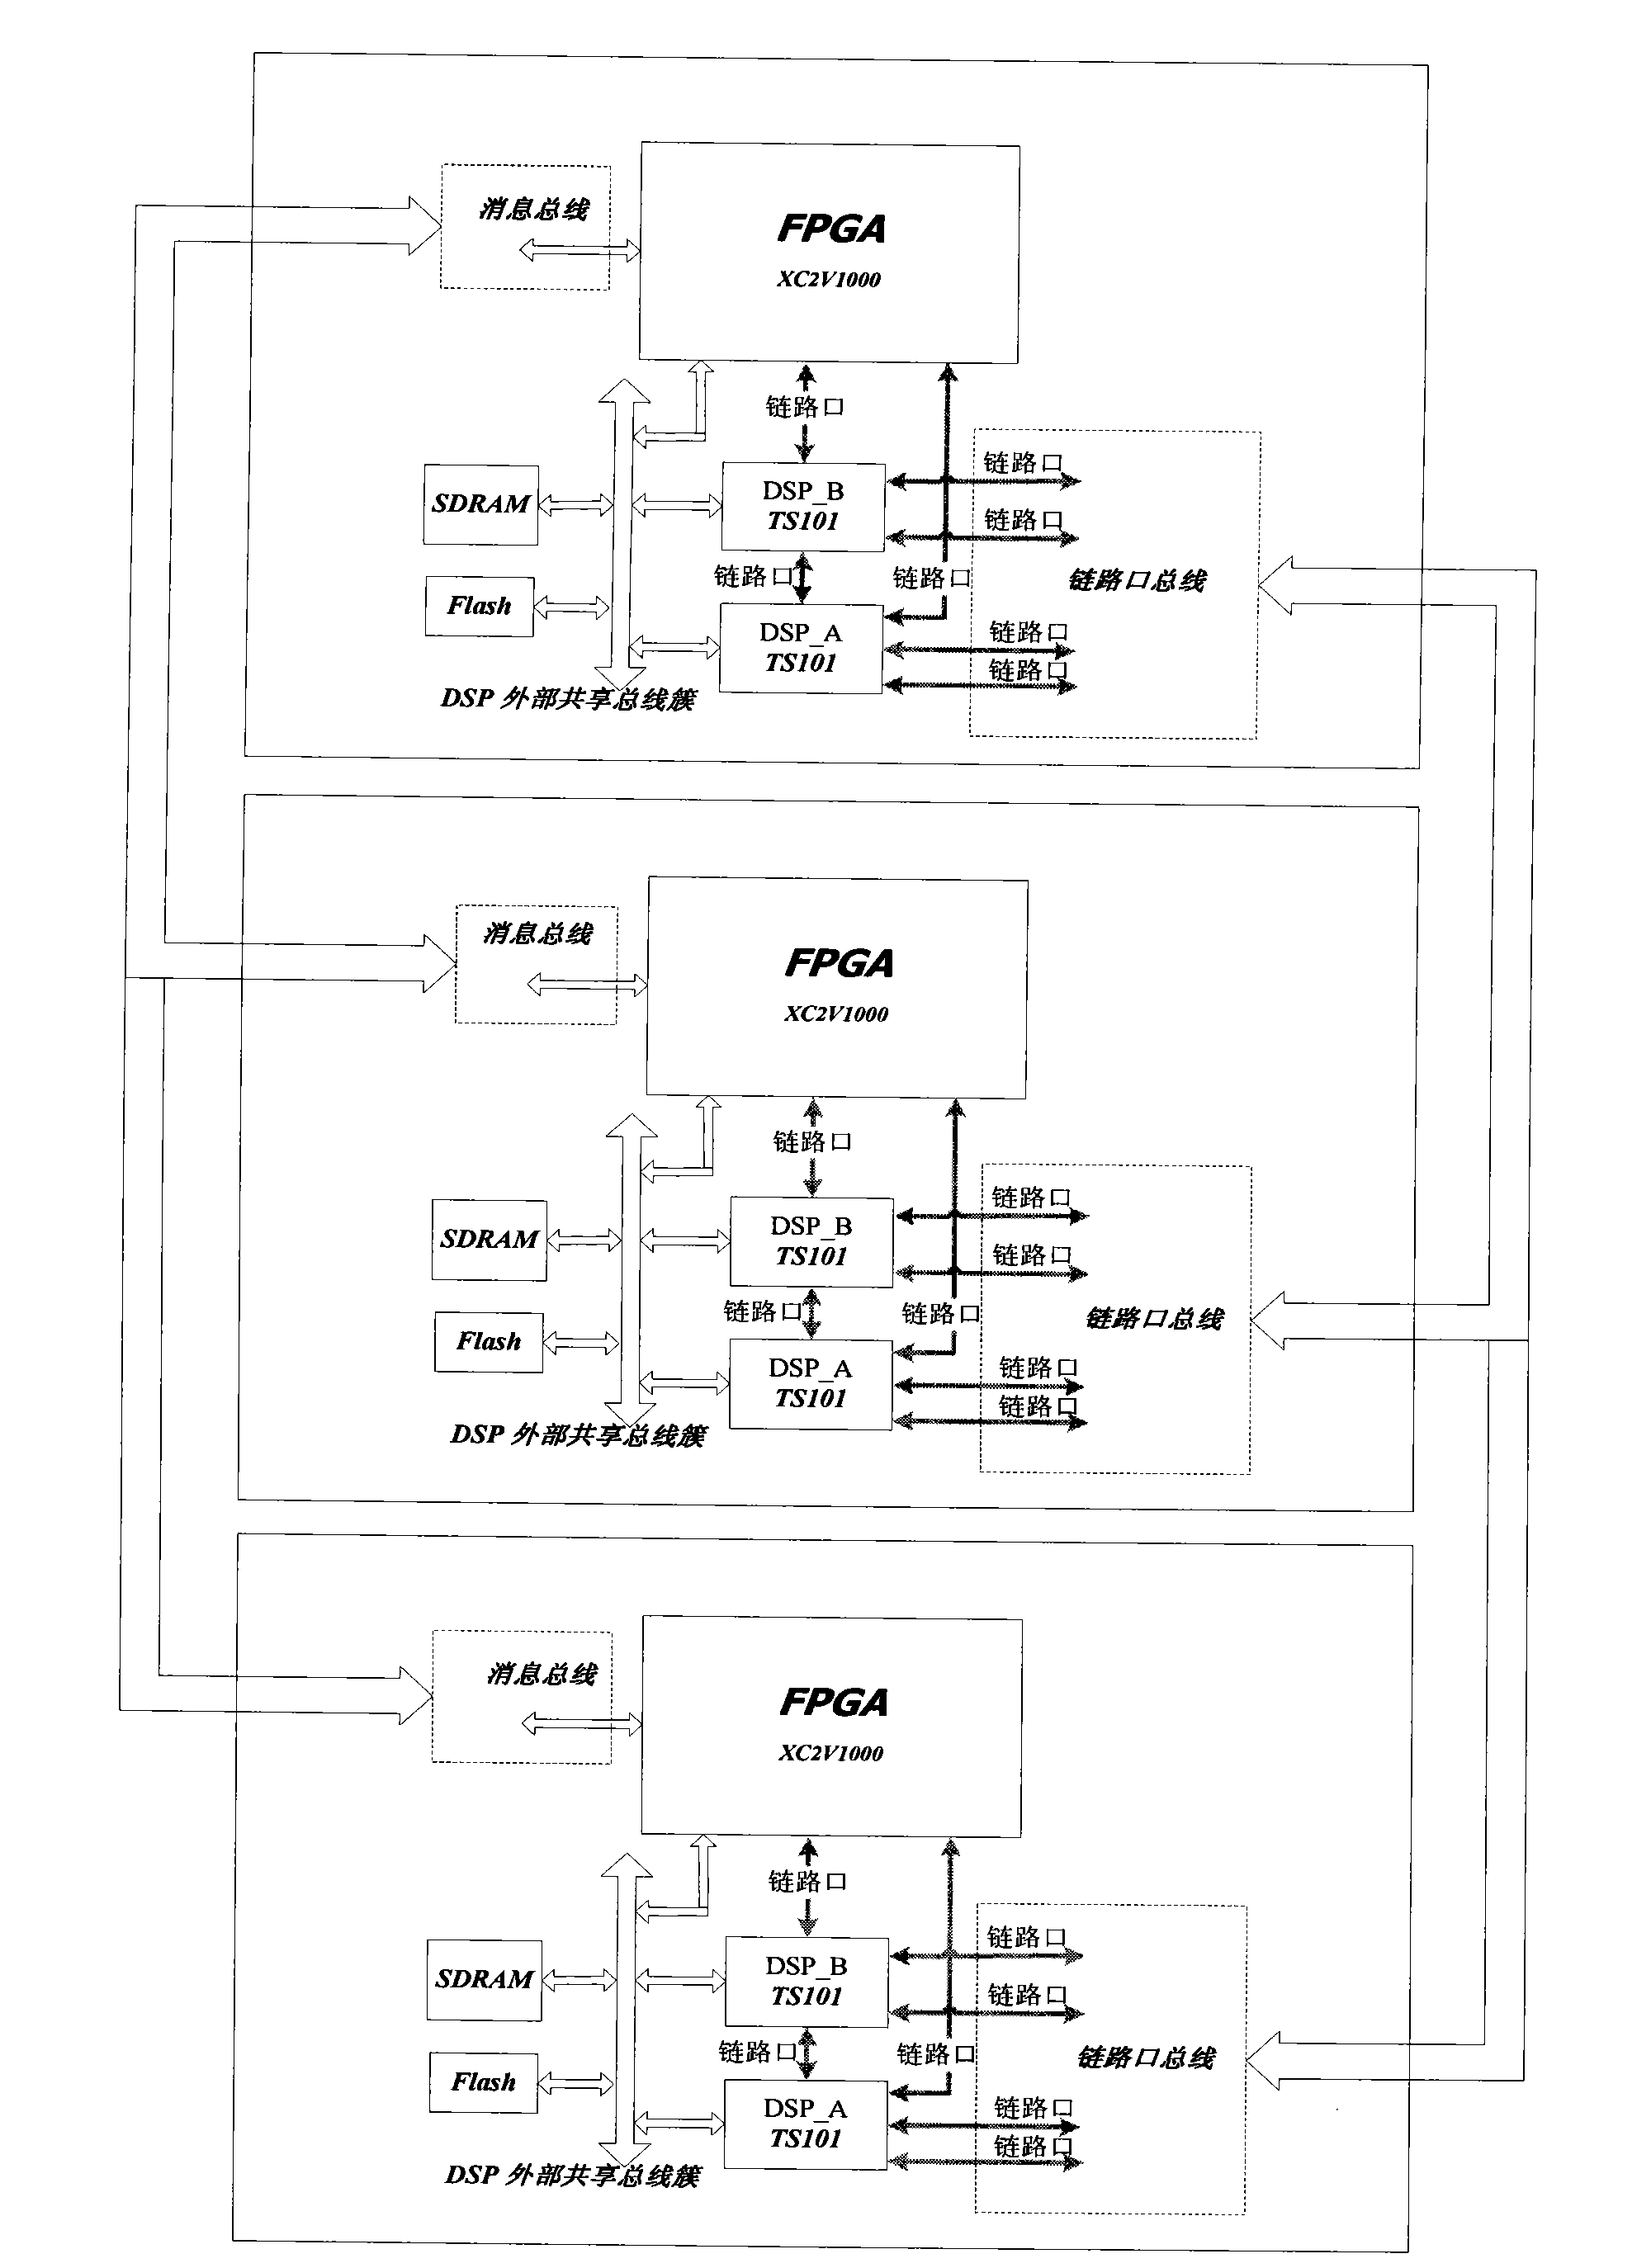 Multi-processor parallel processing system for digital signals